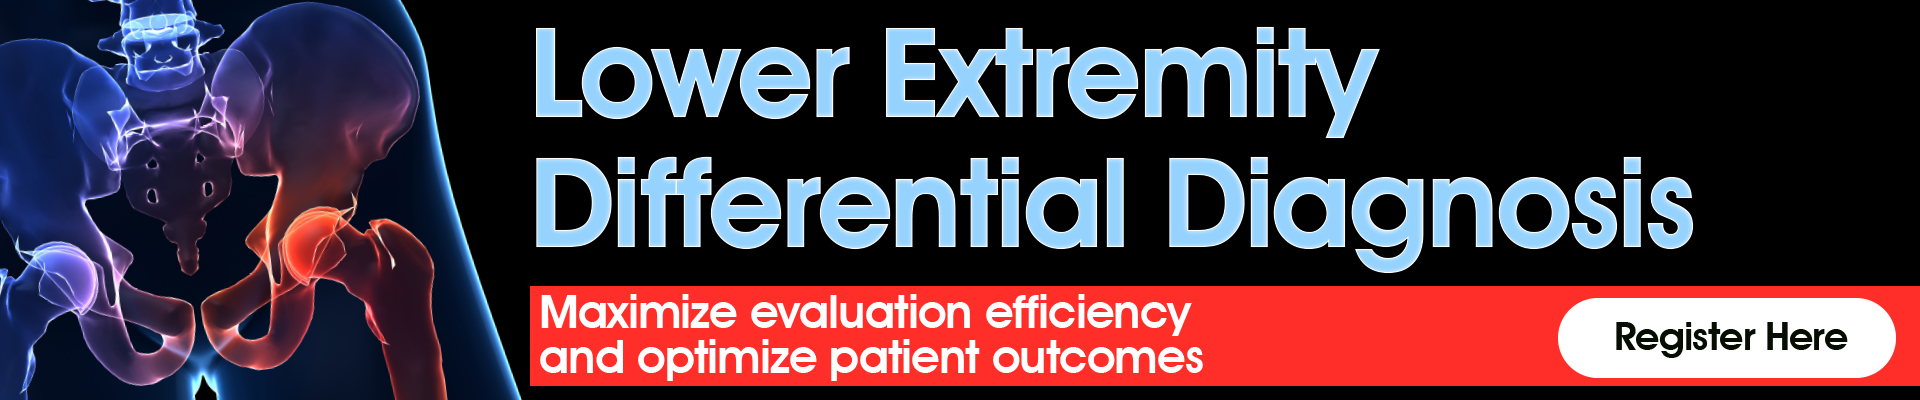 Lower Extremity Differential Diagnosis: Maximize evaluation efficiency and optimize patient outcomes